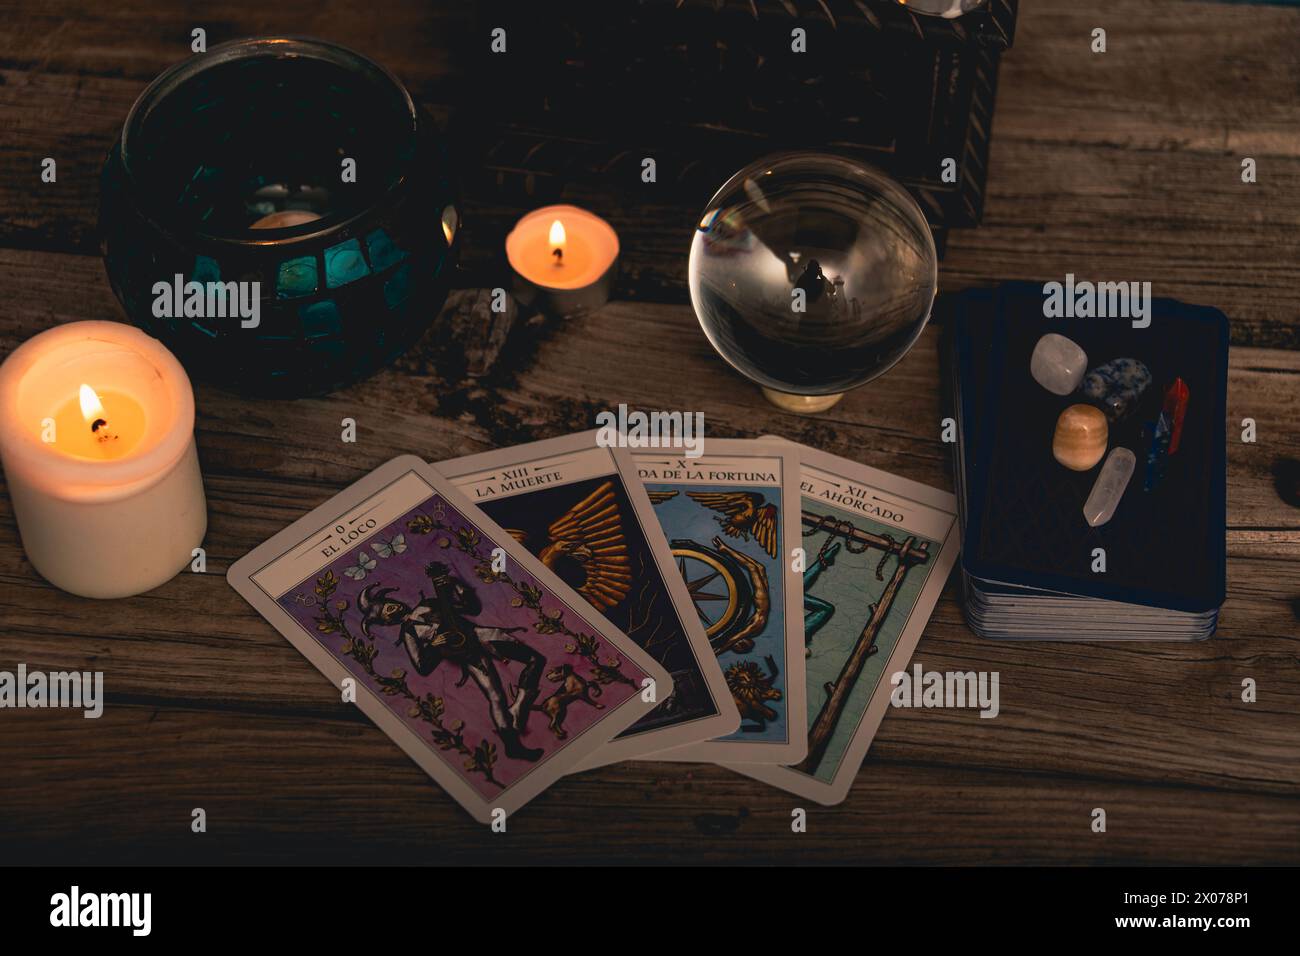 Tarot cards including The Fool and The Lovers alongside crystals and candles on a textured wooden table. Stock Photo